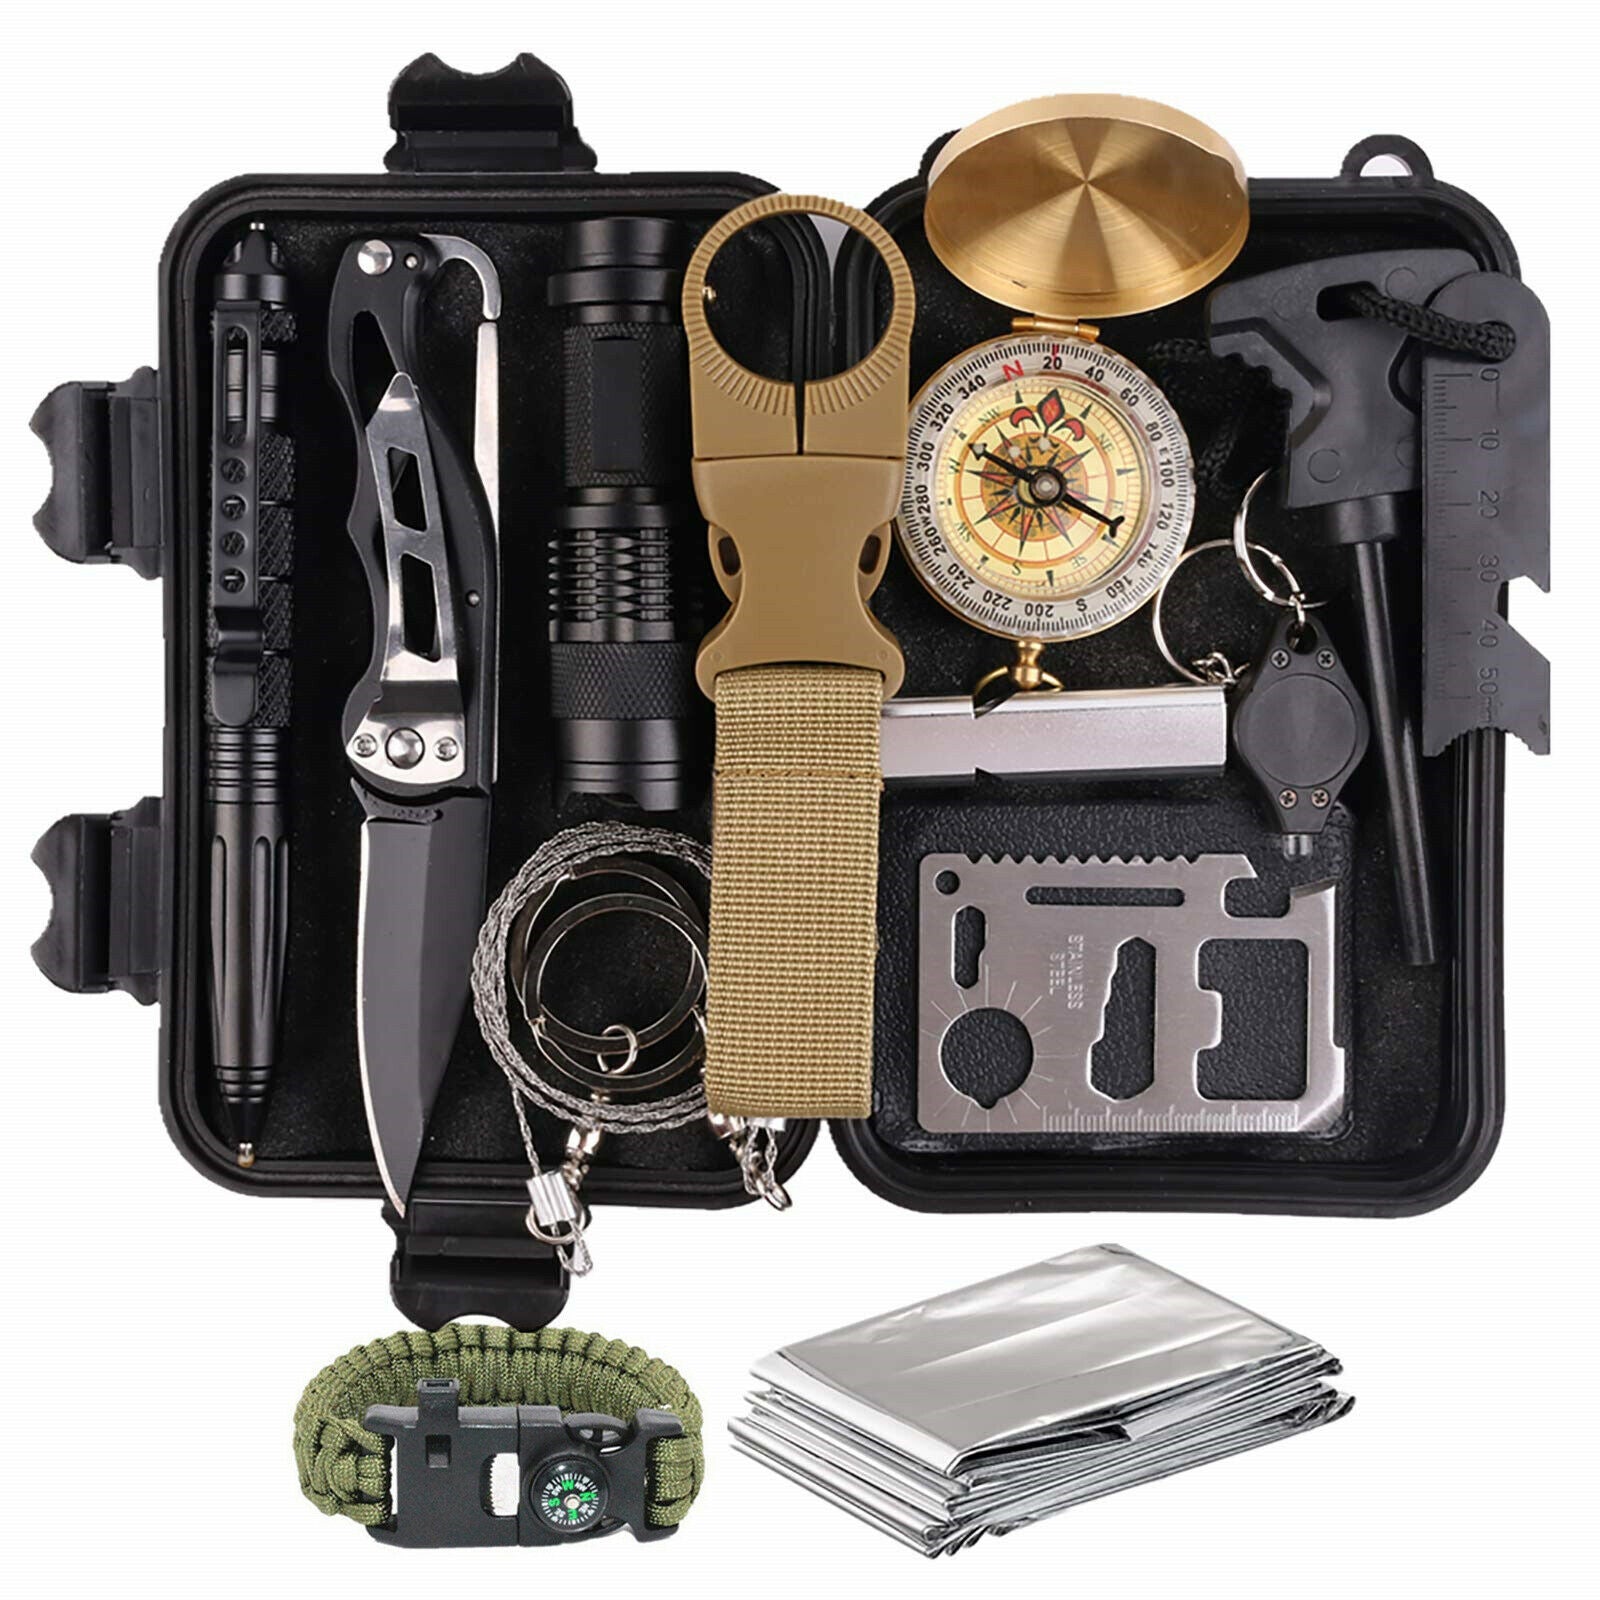 14-In-1 Outdoor Emergency Survival Kit Camping Hiking Tactical